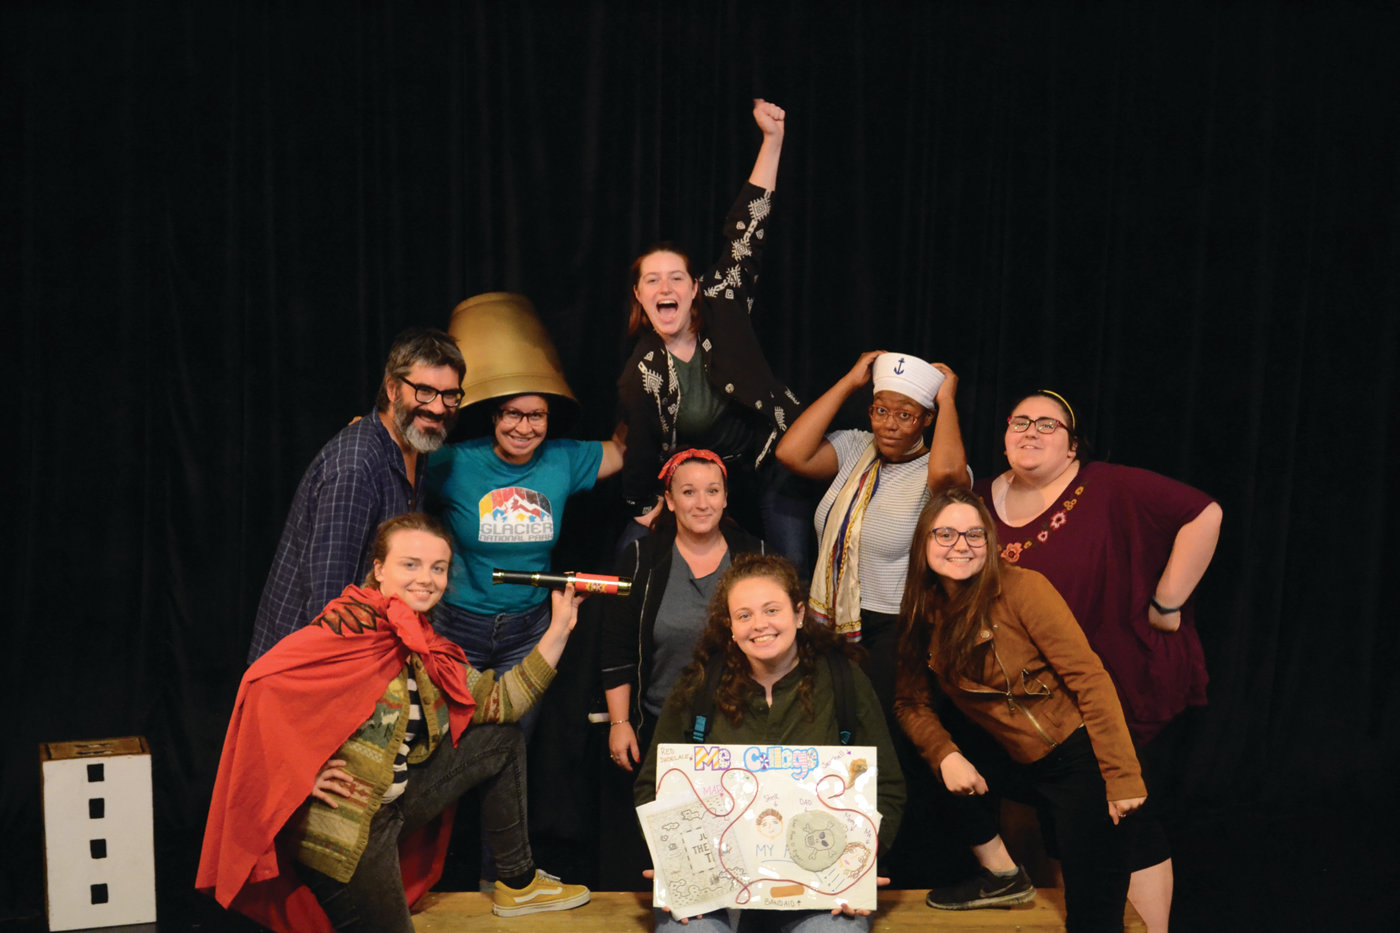 CAST OF MATEYS: Director Dave Rabinow, Gamm teaching artist and production stage manager Jessica Corsentino (middle) and the cast of “Judy Moody & Stink: The Mad, Mad, Mad, Mad Treasure Hunt,” which includes Tyra Wilson, Ava Mascena, Alexis Ingram, Cassidy Mccartan, Kelly Robertson, Maggie Papa and Olivia Winters.